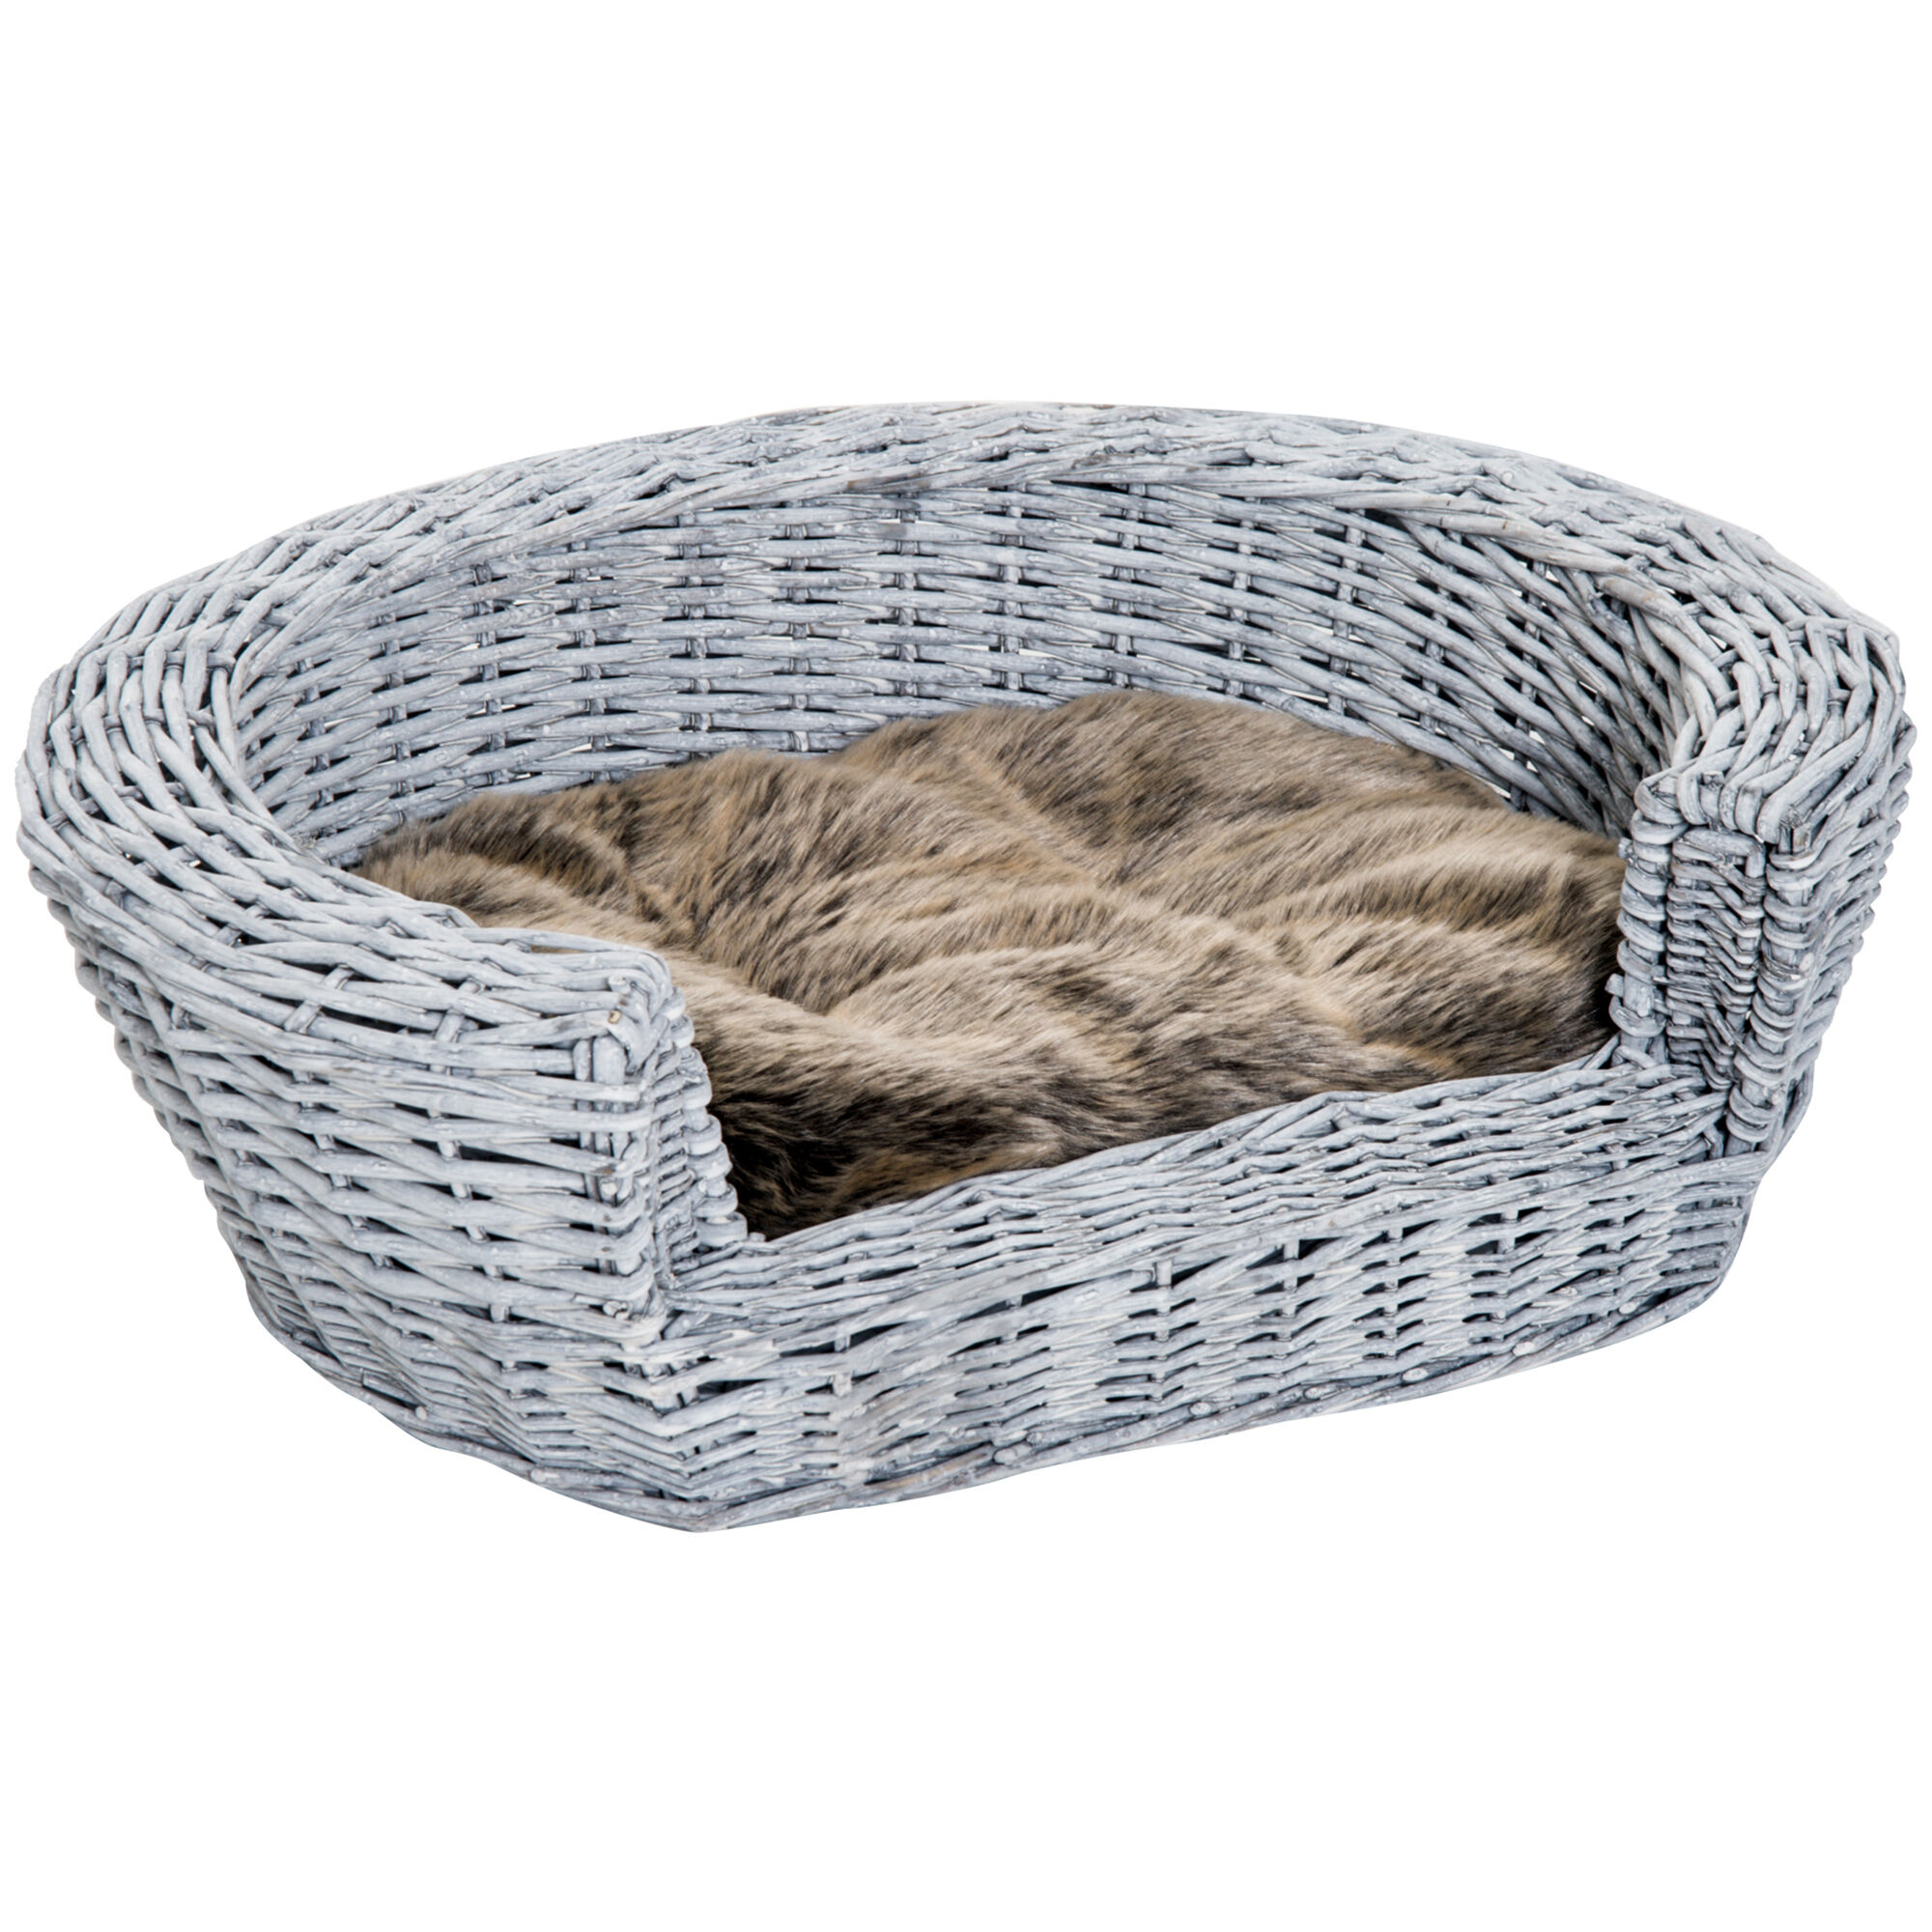 PawHut Pet Sofa Bed, Willow Rattan Basket with Soft Cushion, Durable, for Cats & Small Dogs, 57L x 46W x 17.5H cm, Grey